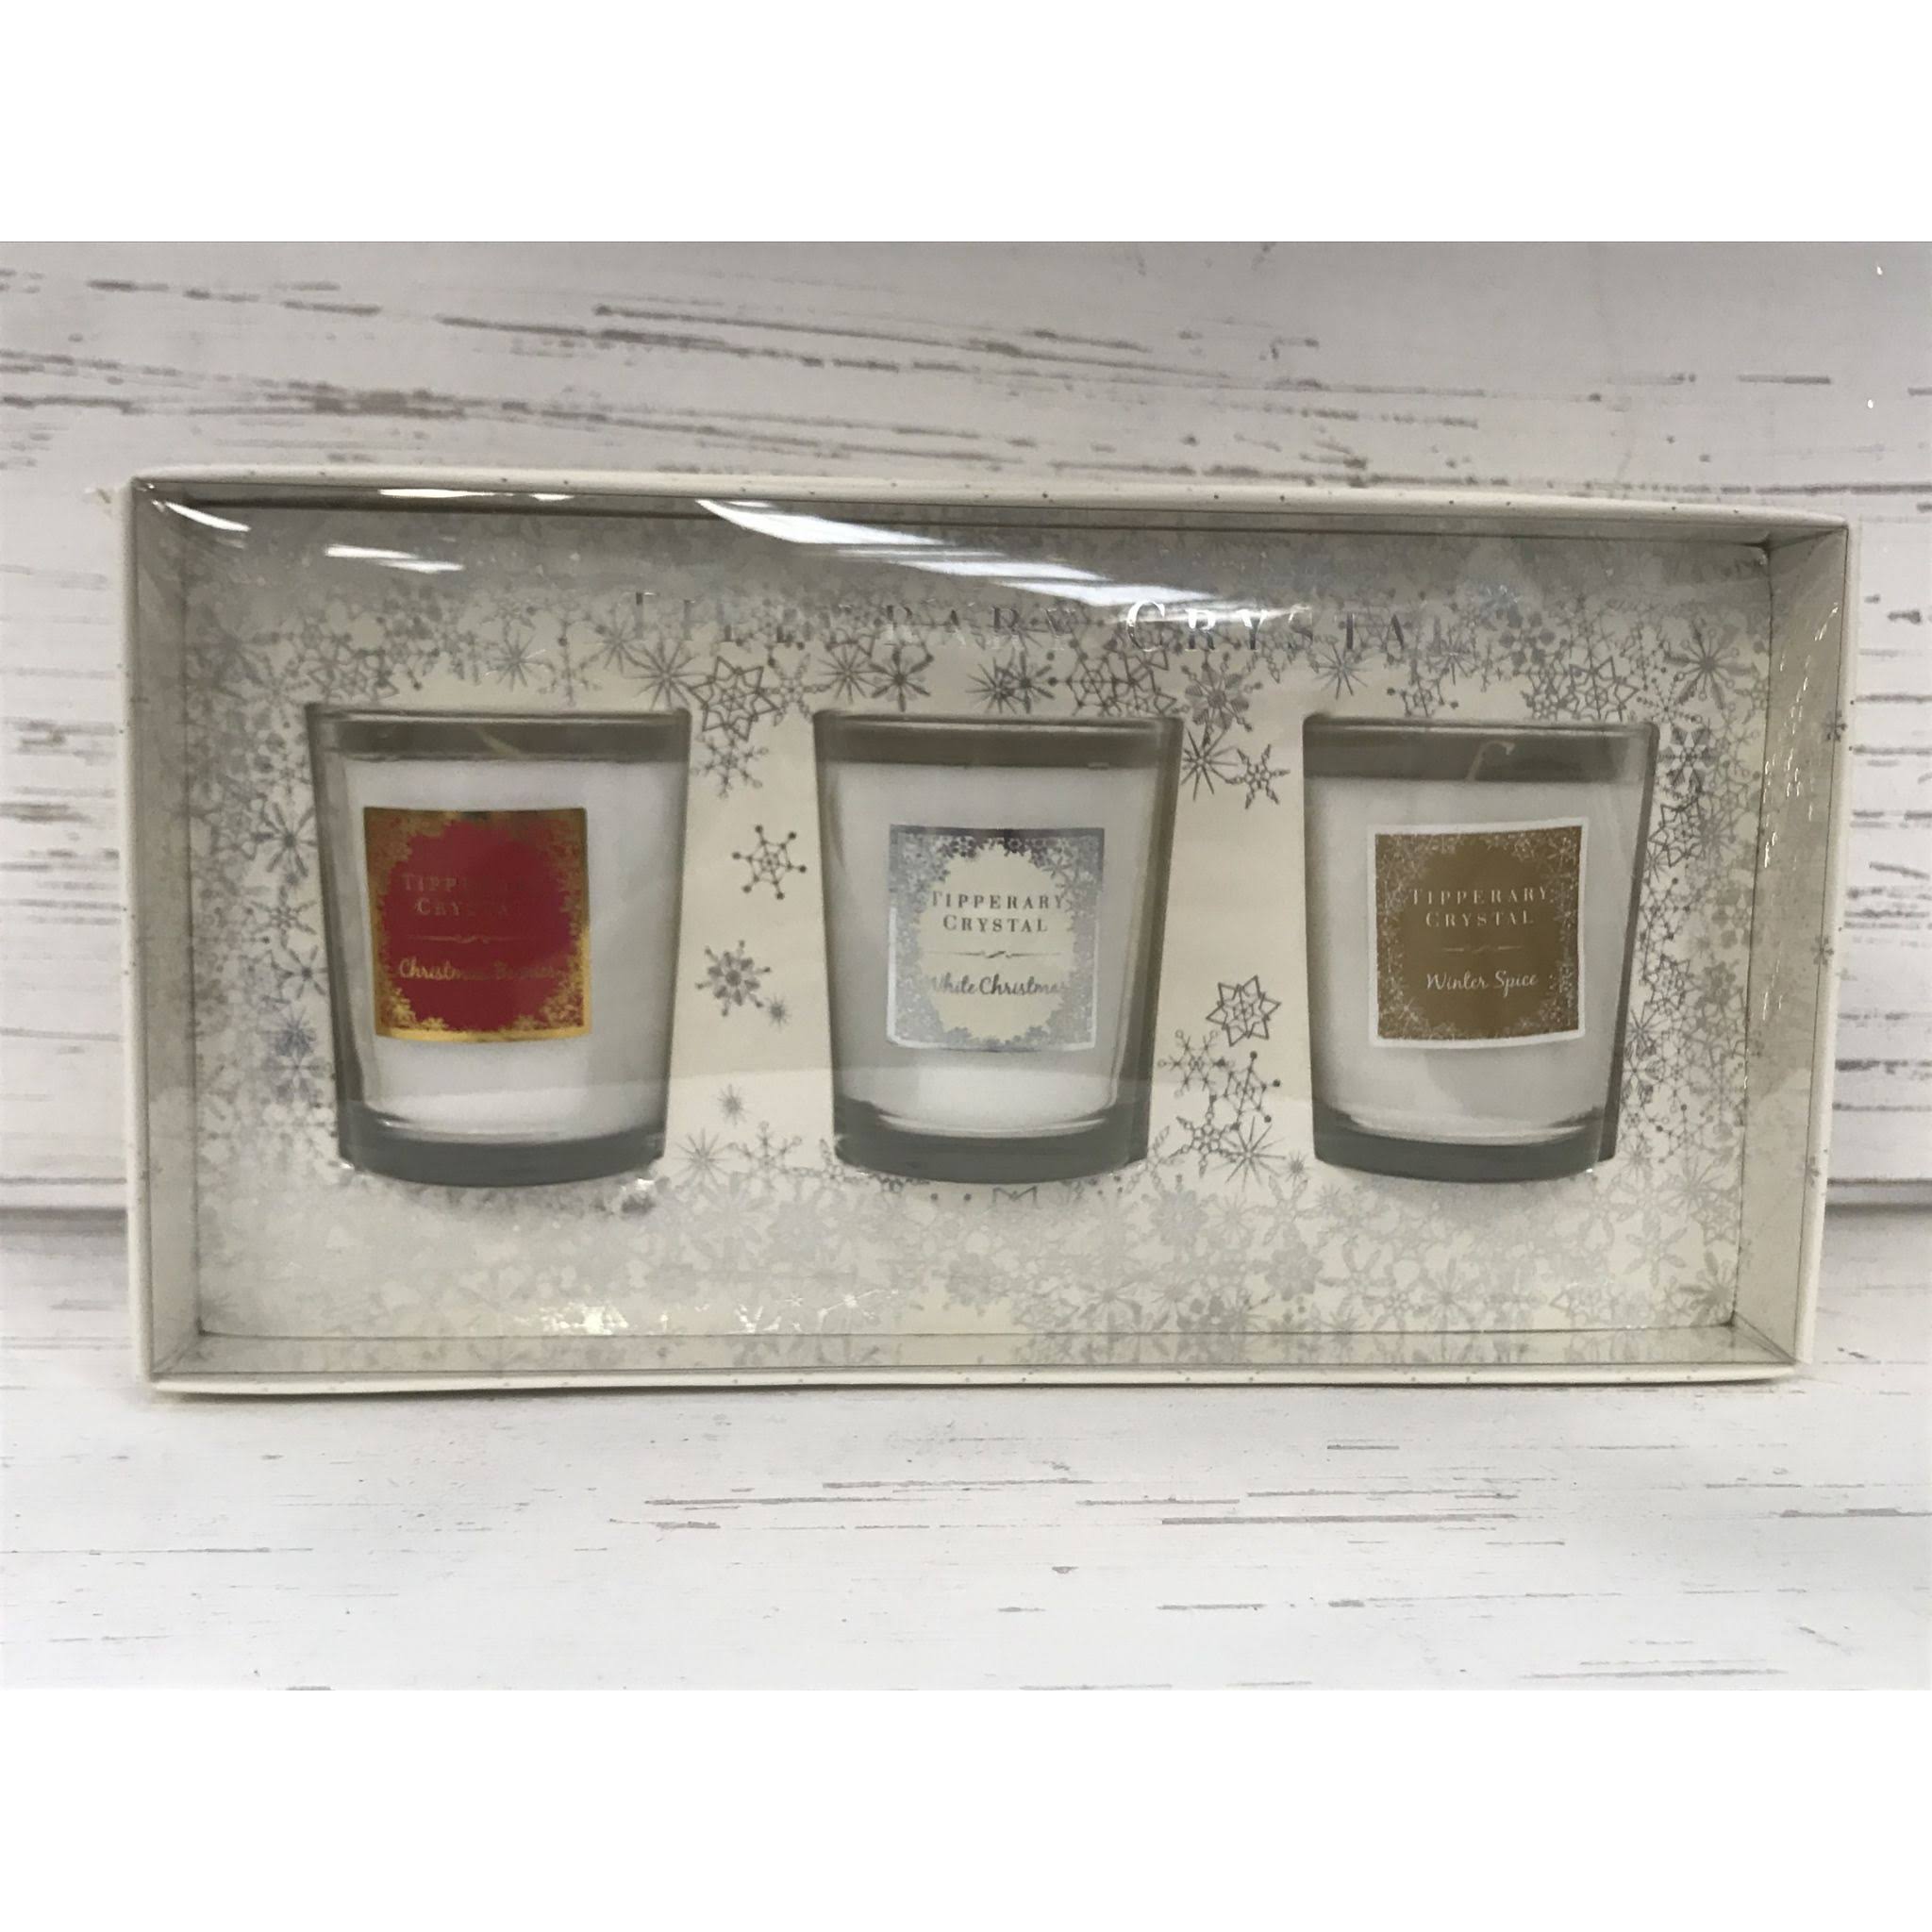 Tipperary Crystal Set of Three Scented Candles in White Gift Box